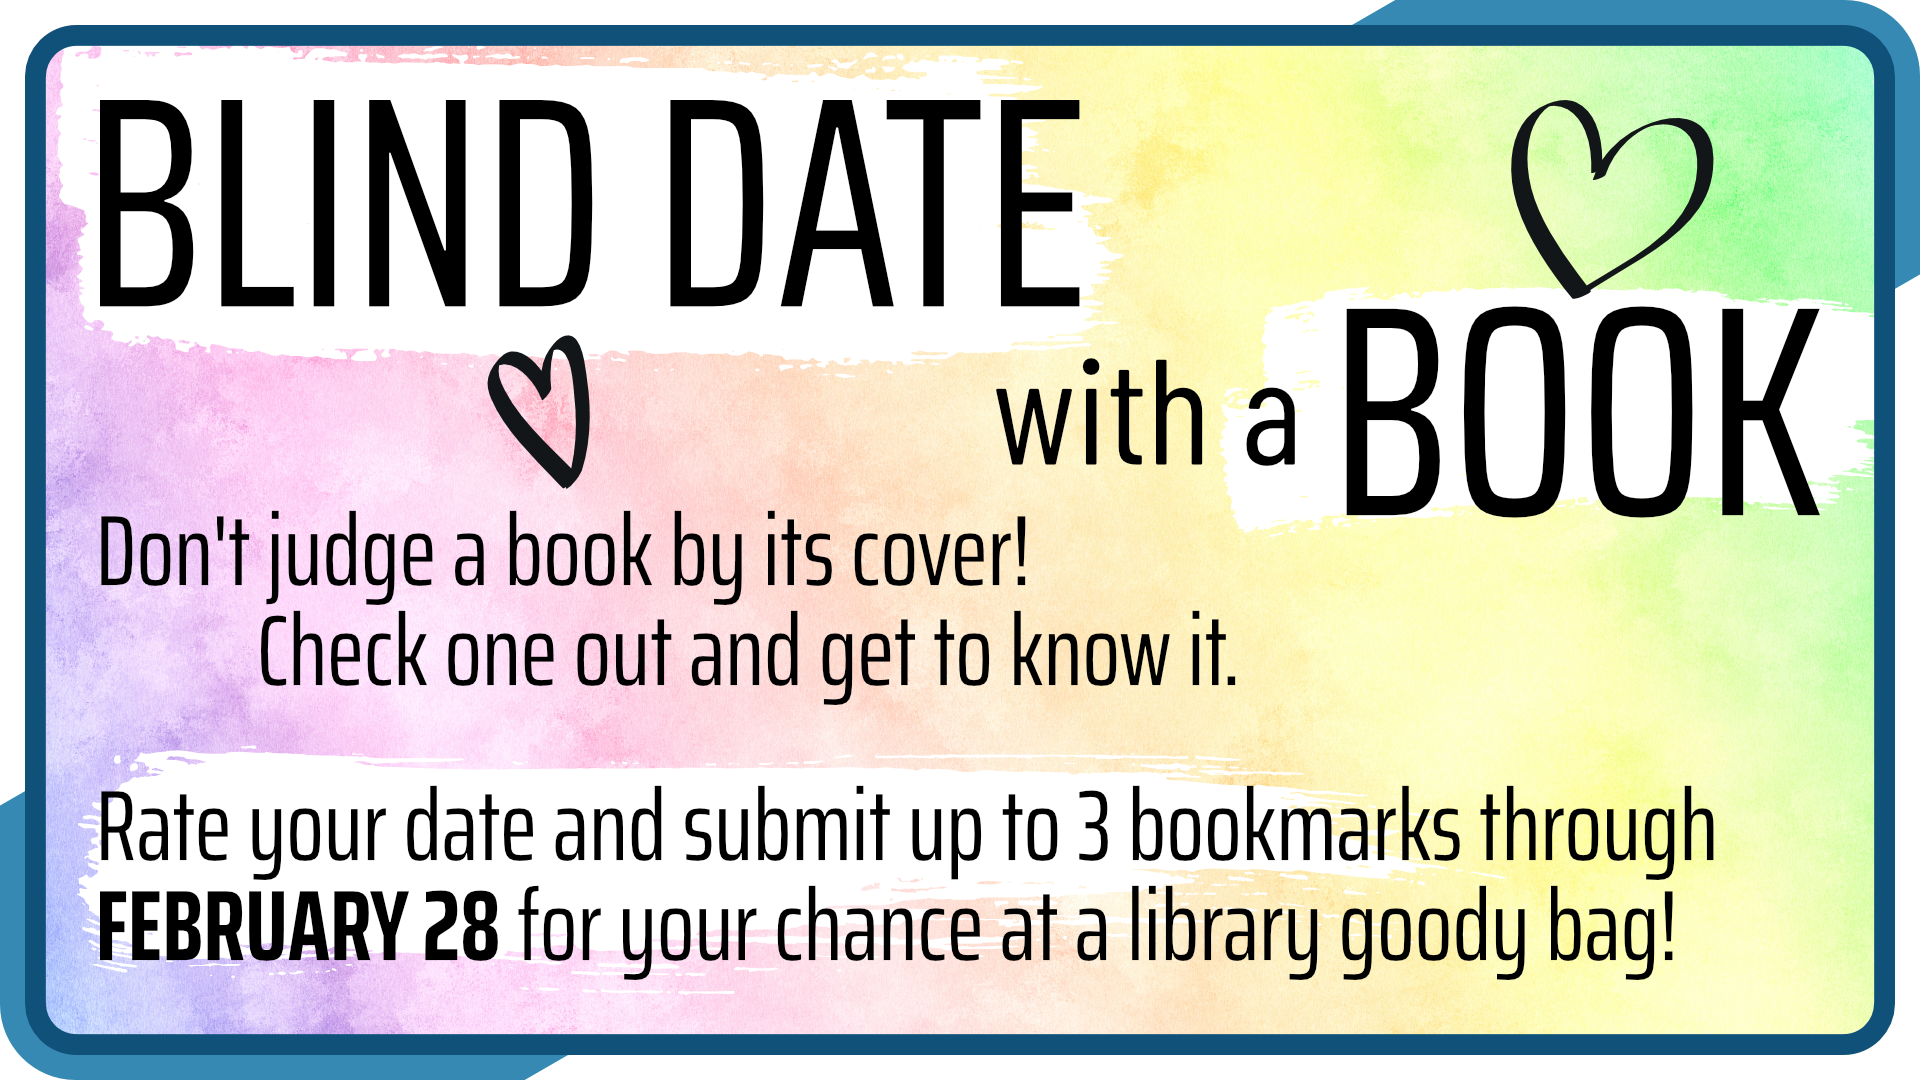 Blind Date with a Book, January 31 through February 28, intended for ages 13 and up